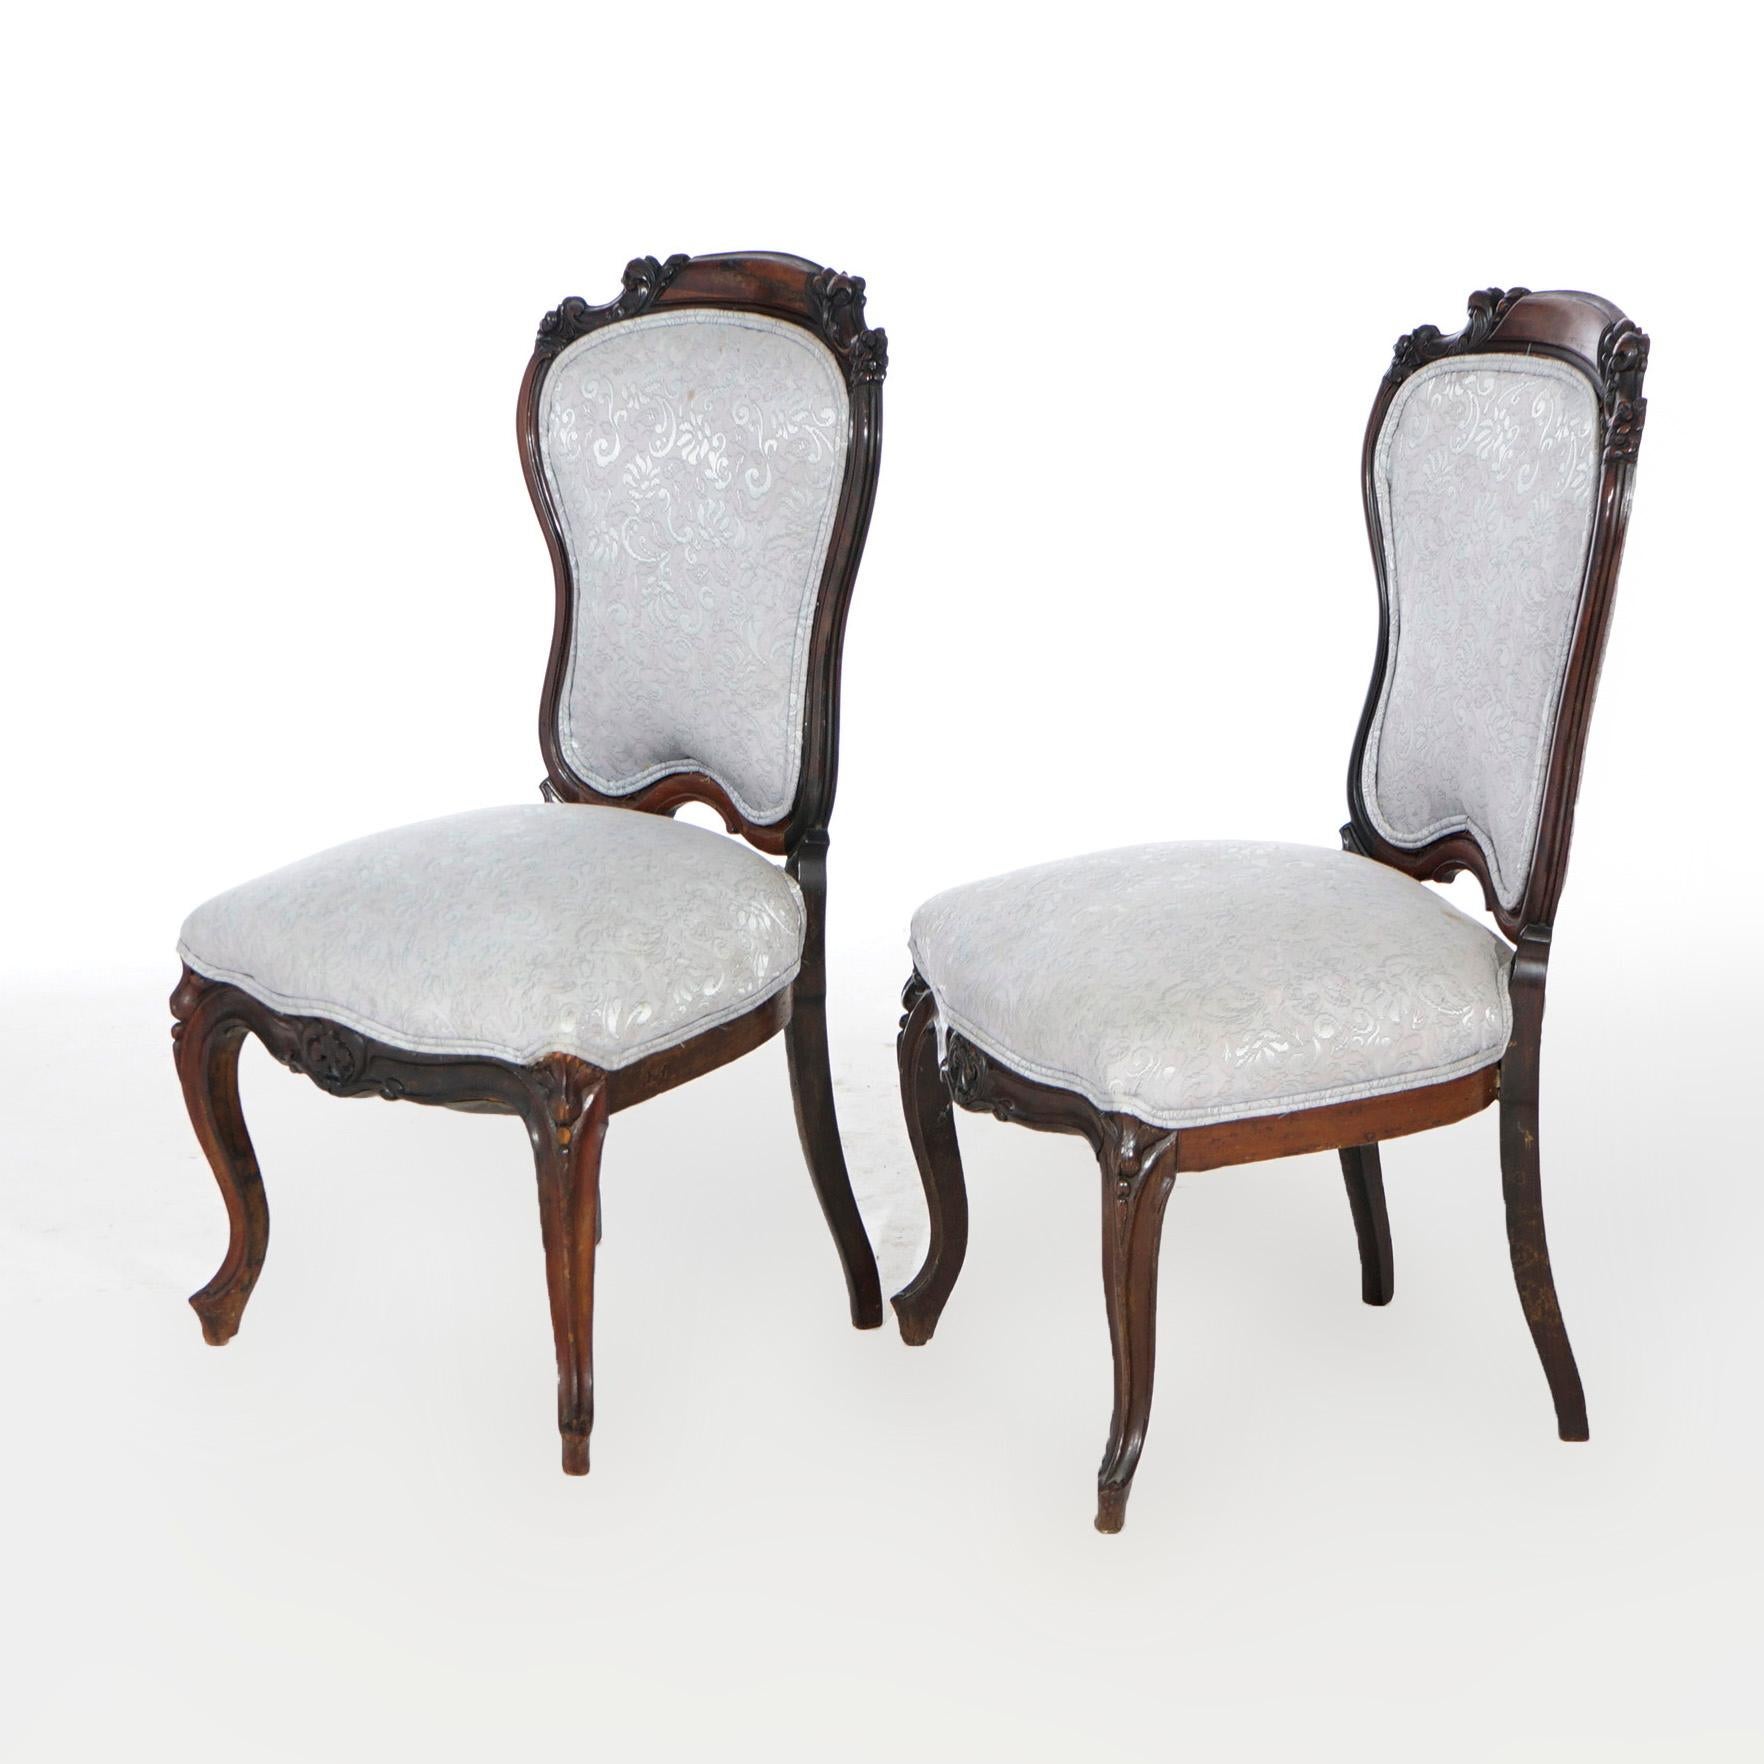 Antique Pair Victorian Carved Mahogany Upholstered Side Chairs 19th C In Good Condition For Sale In Big Flats, NY